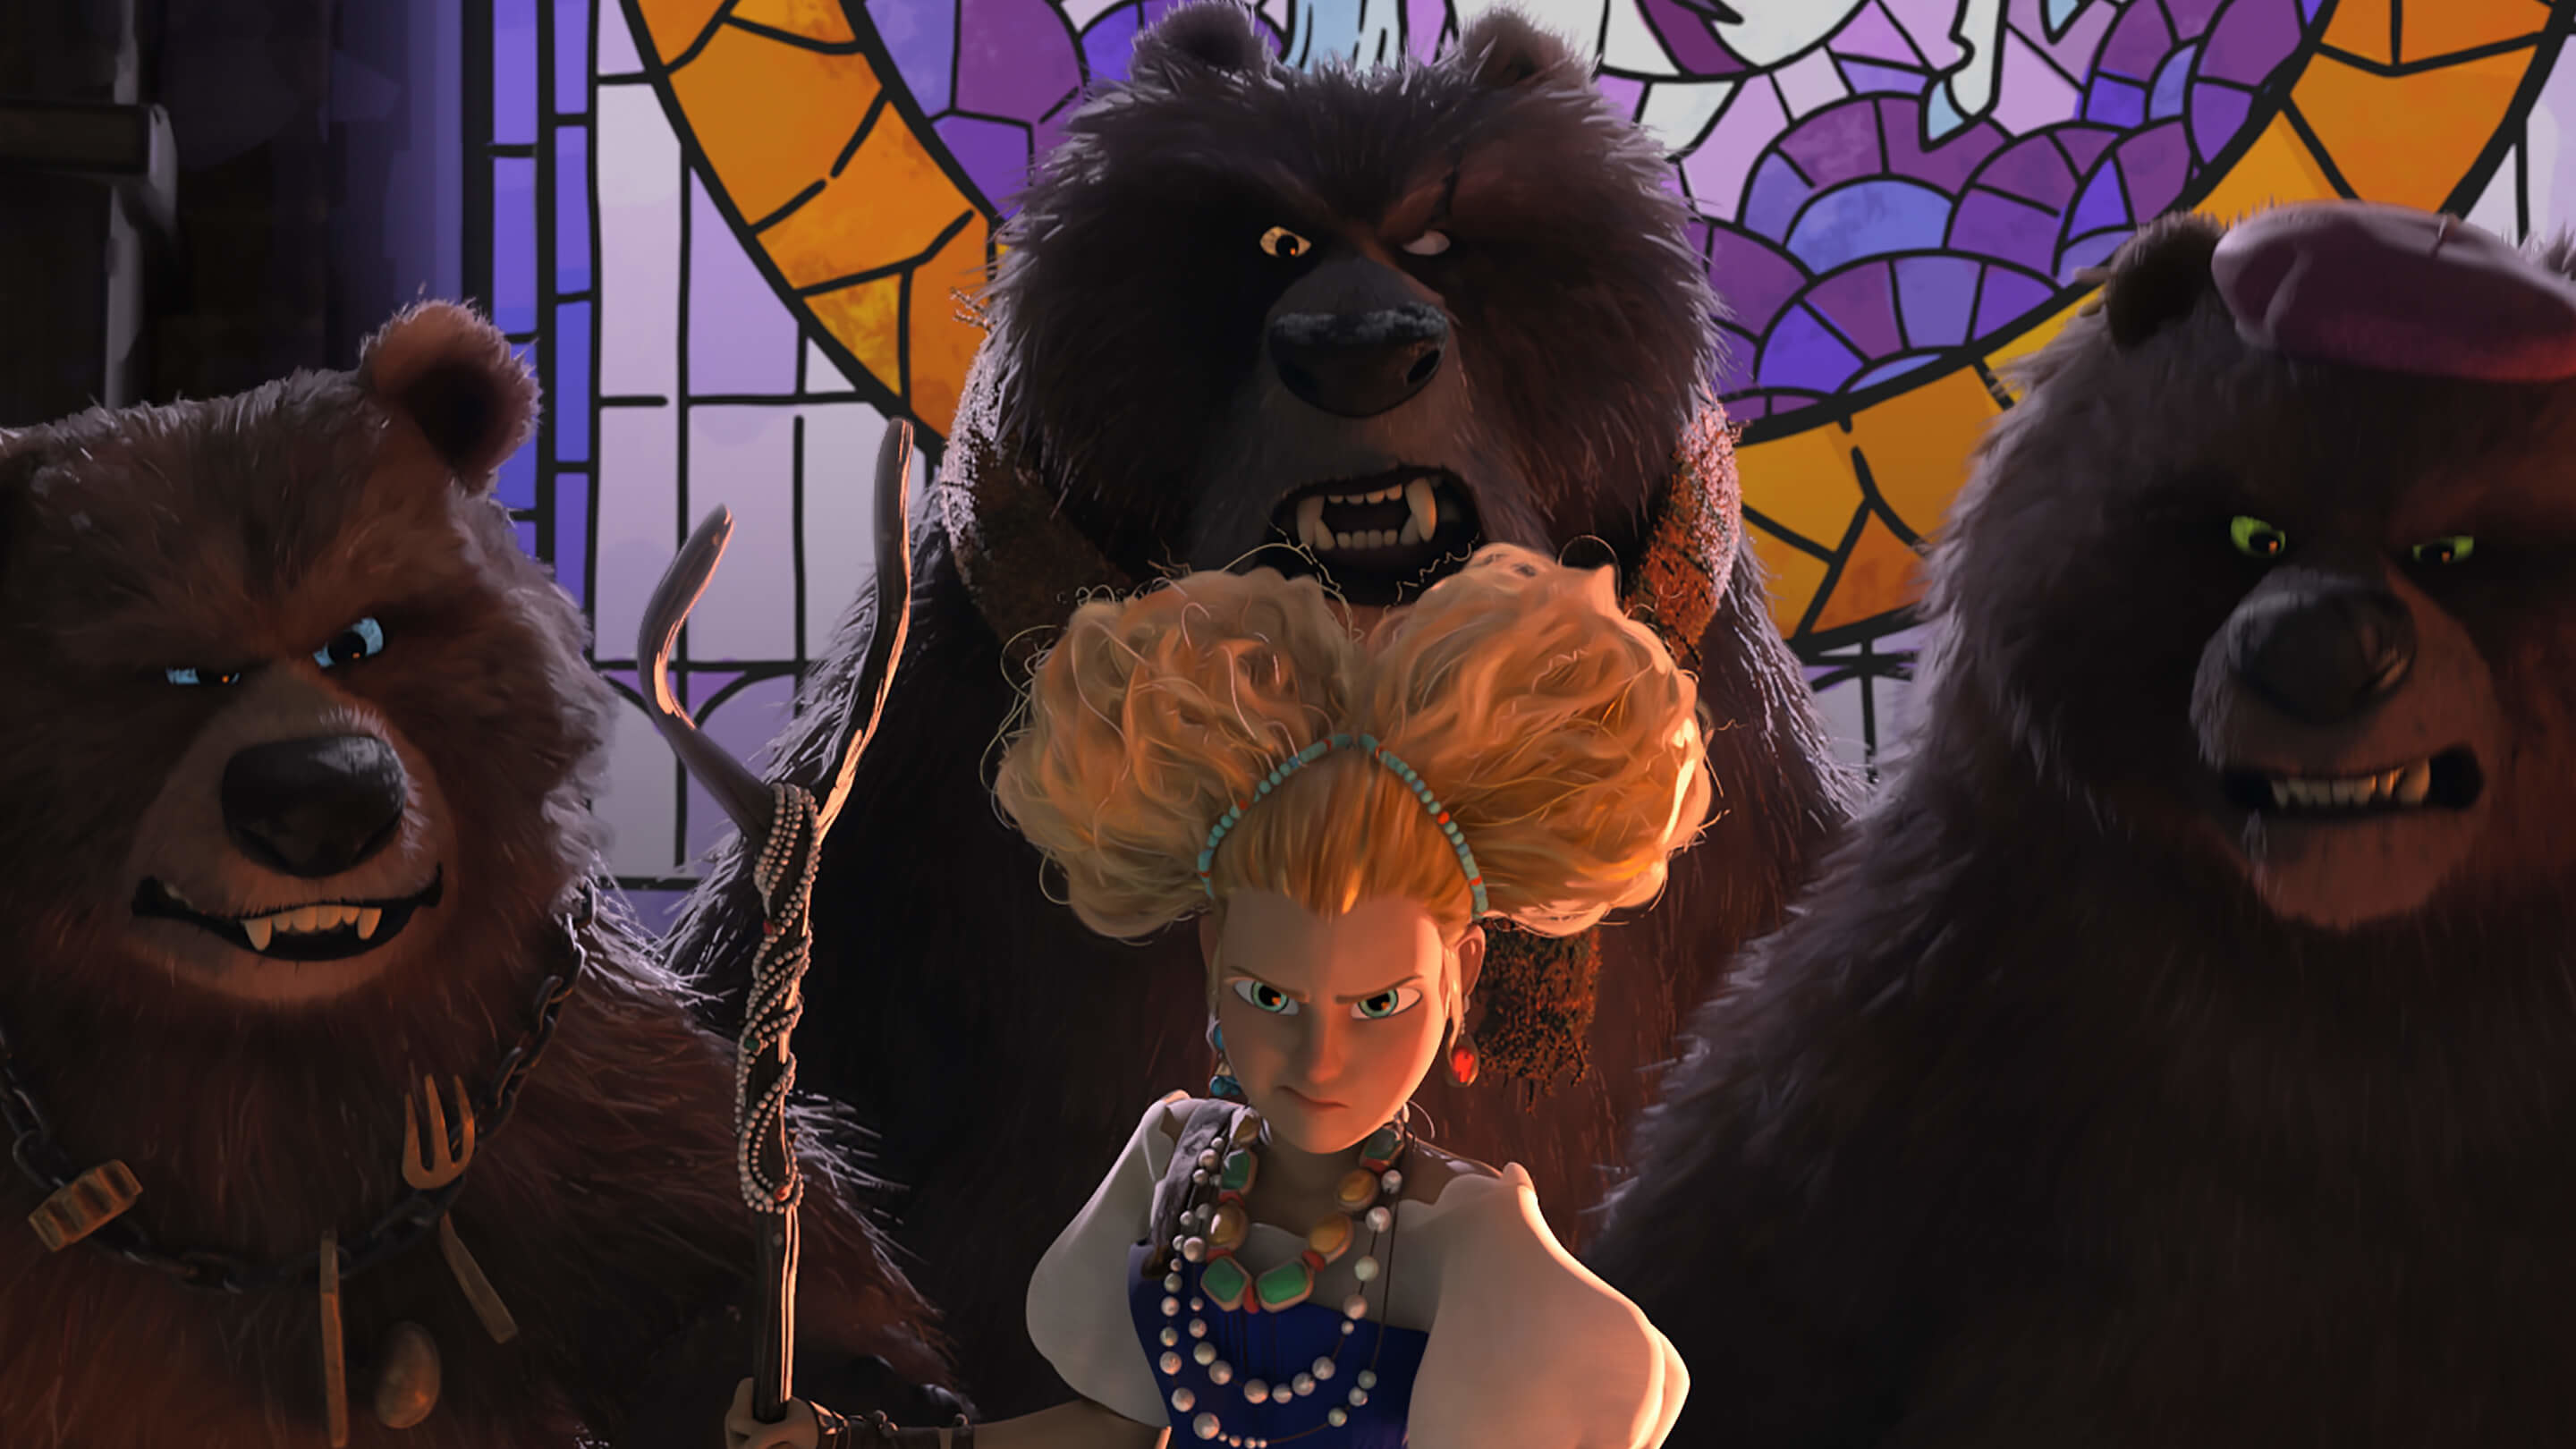 Goldilocks and the Three Bears stand in front of a stained glass window